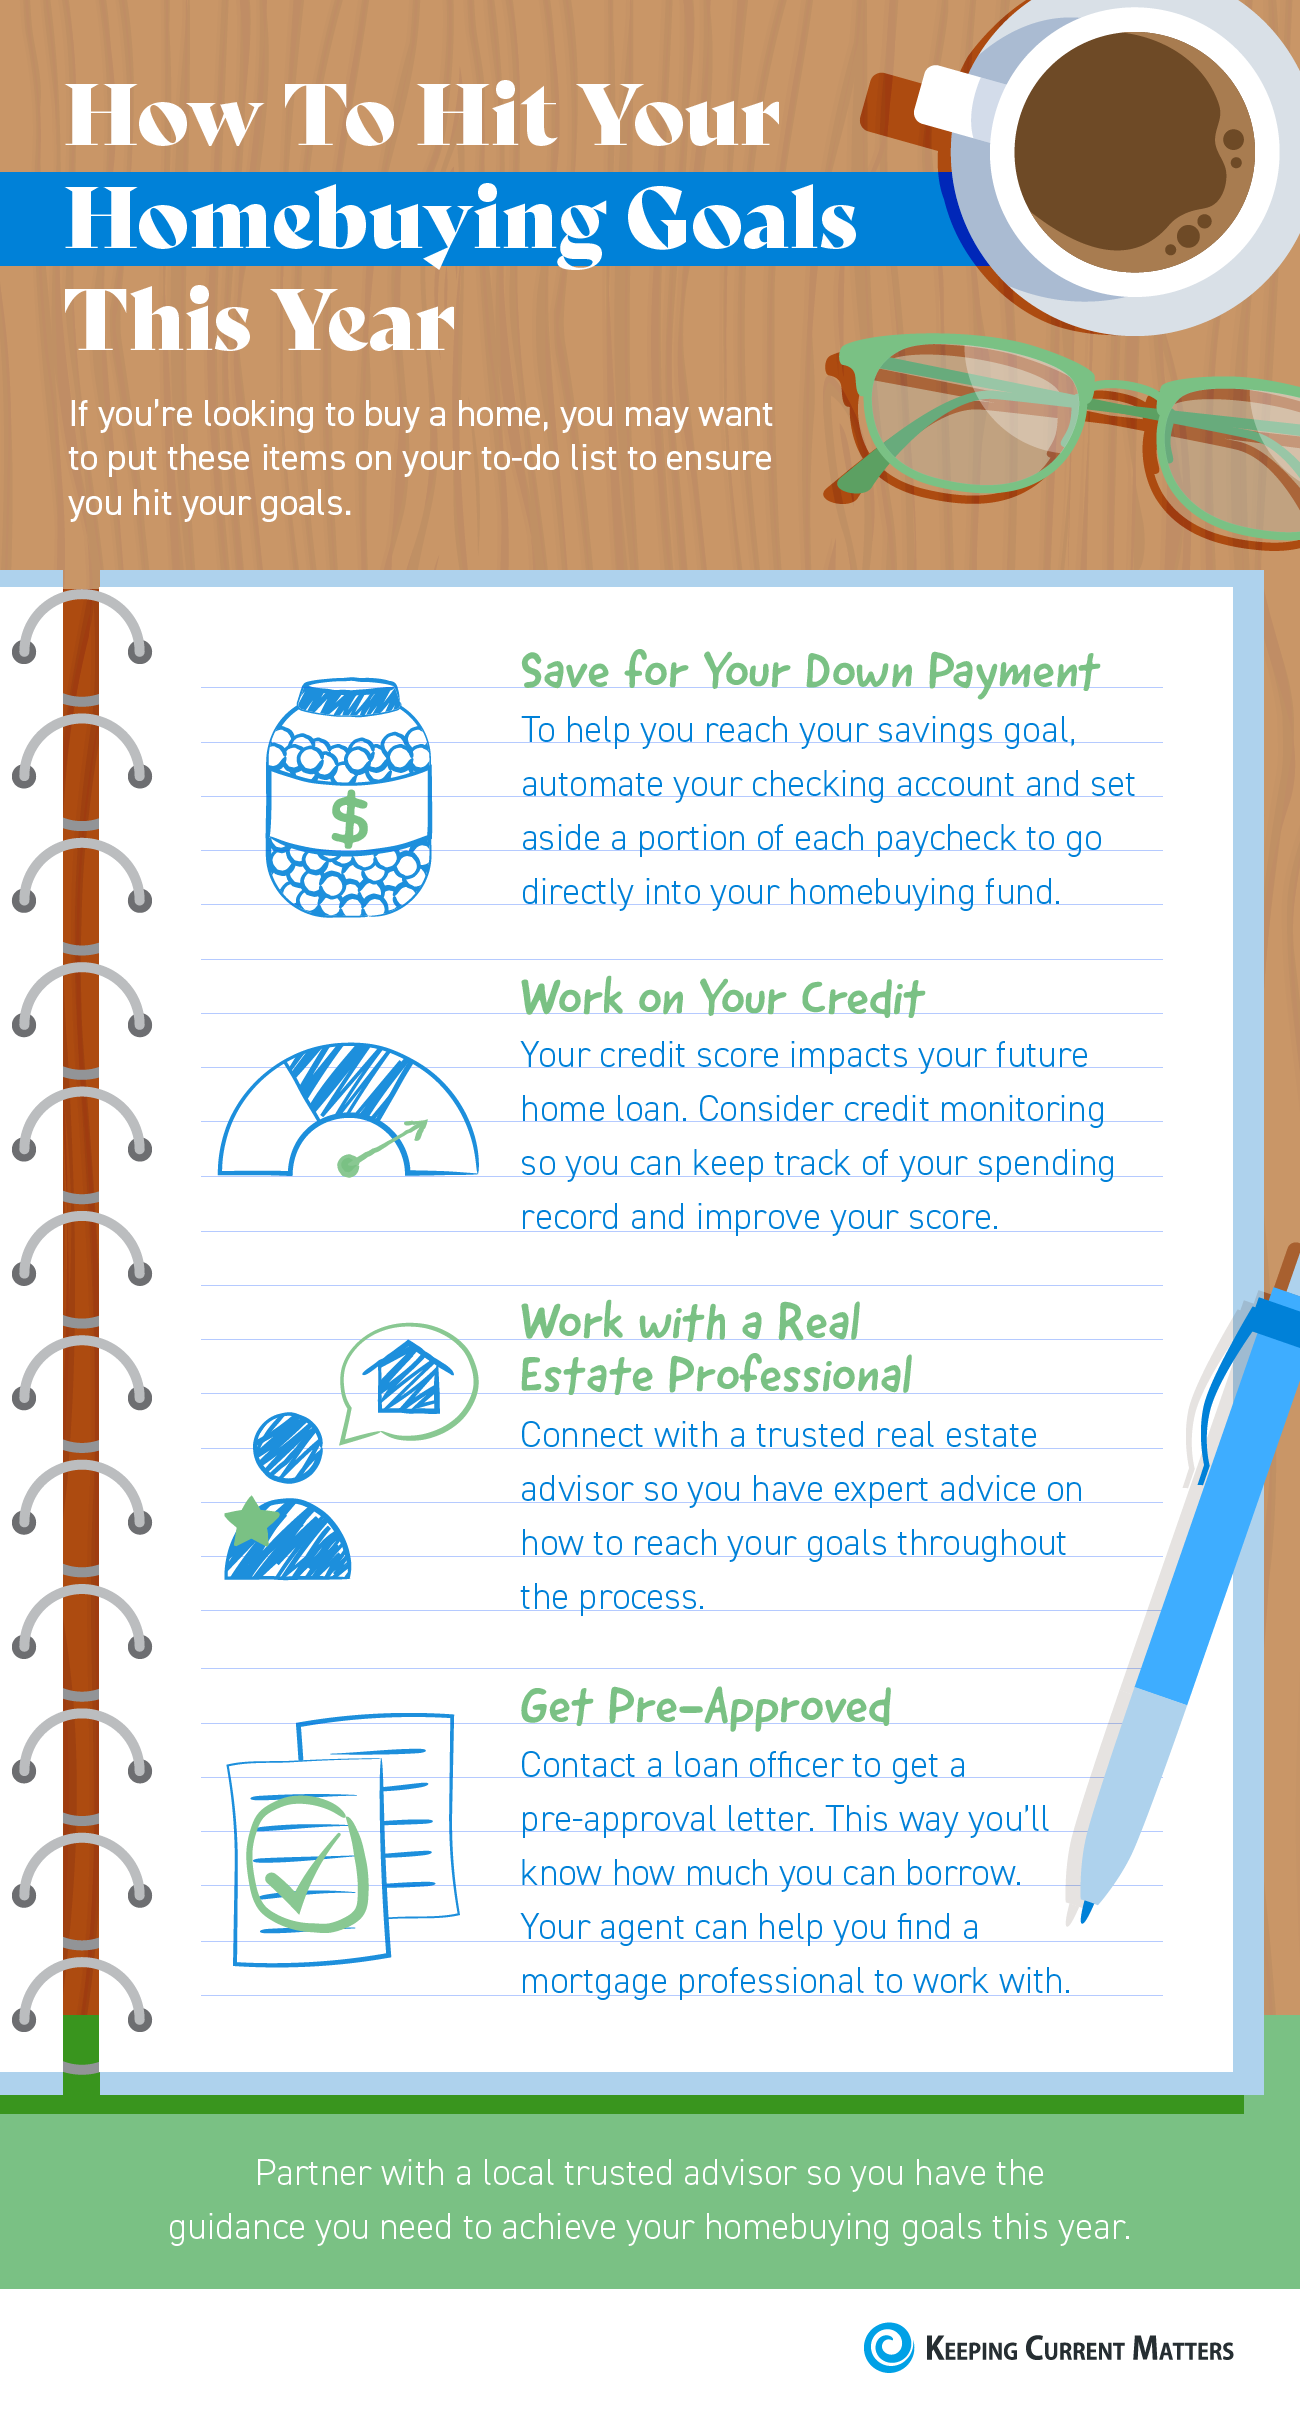 How To Hit Your Homebuying Goals This Year [INFOGRAPHIC] | Keeping Current Matters